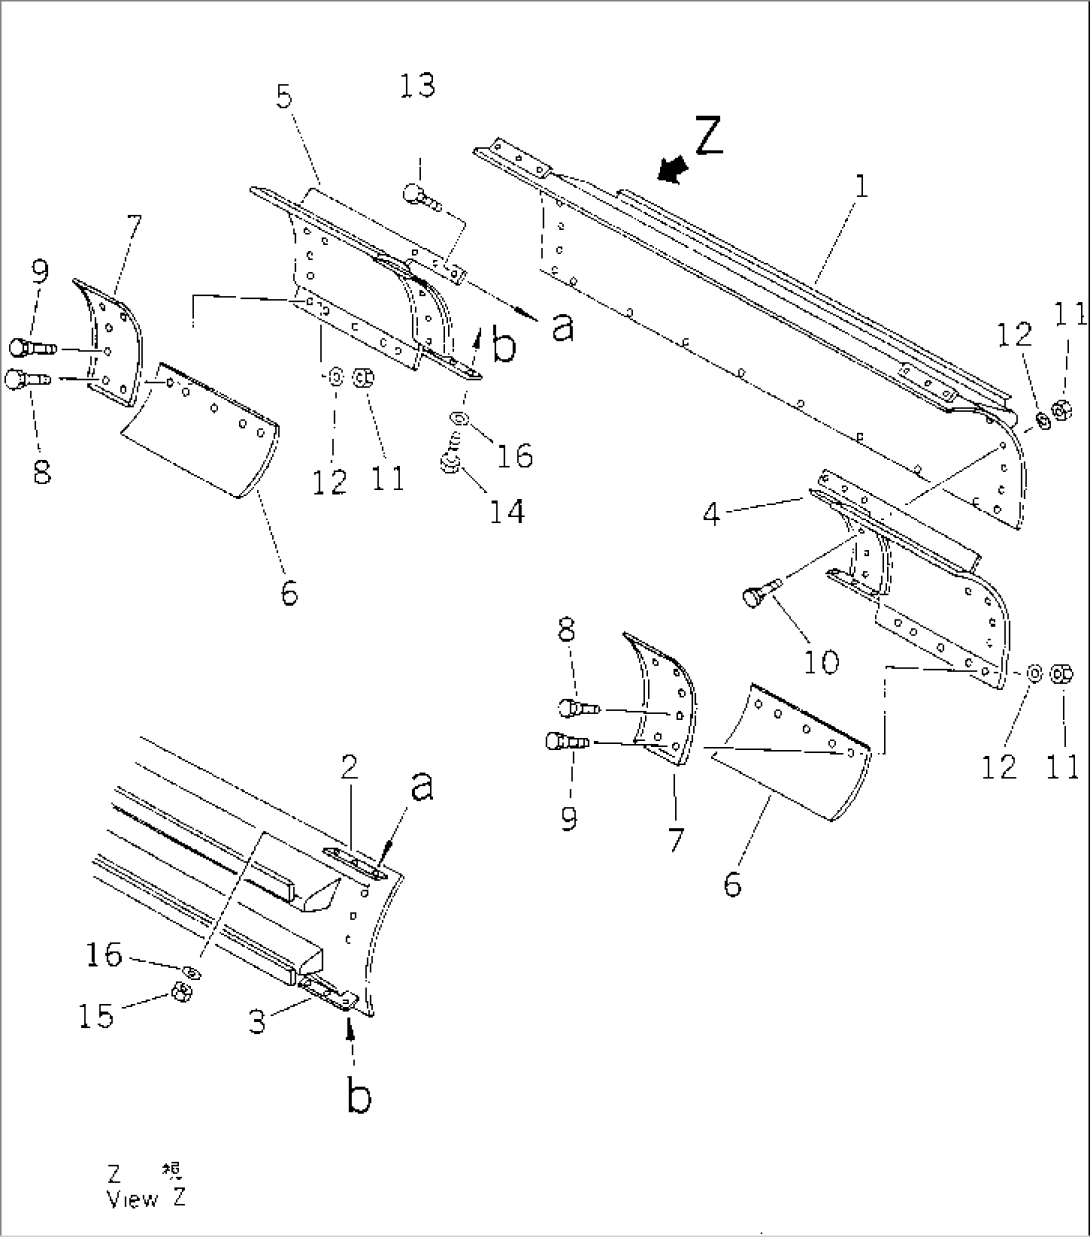 EXTENSION BLADE